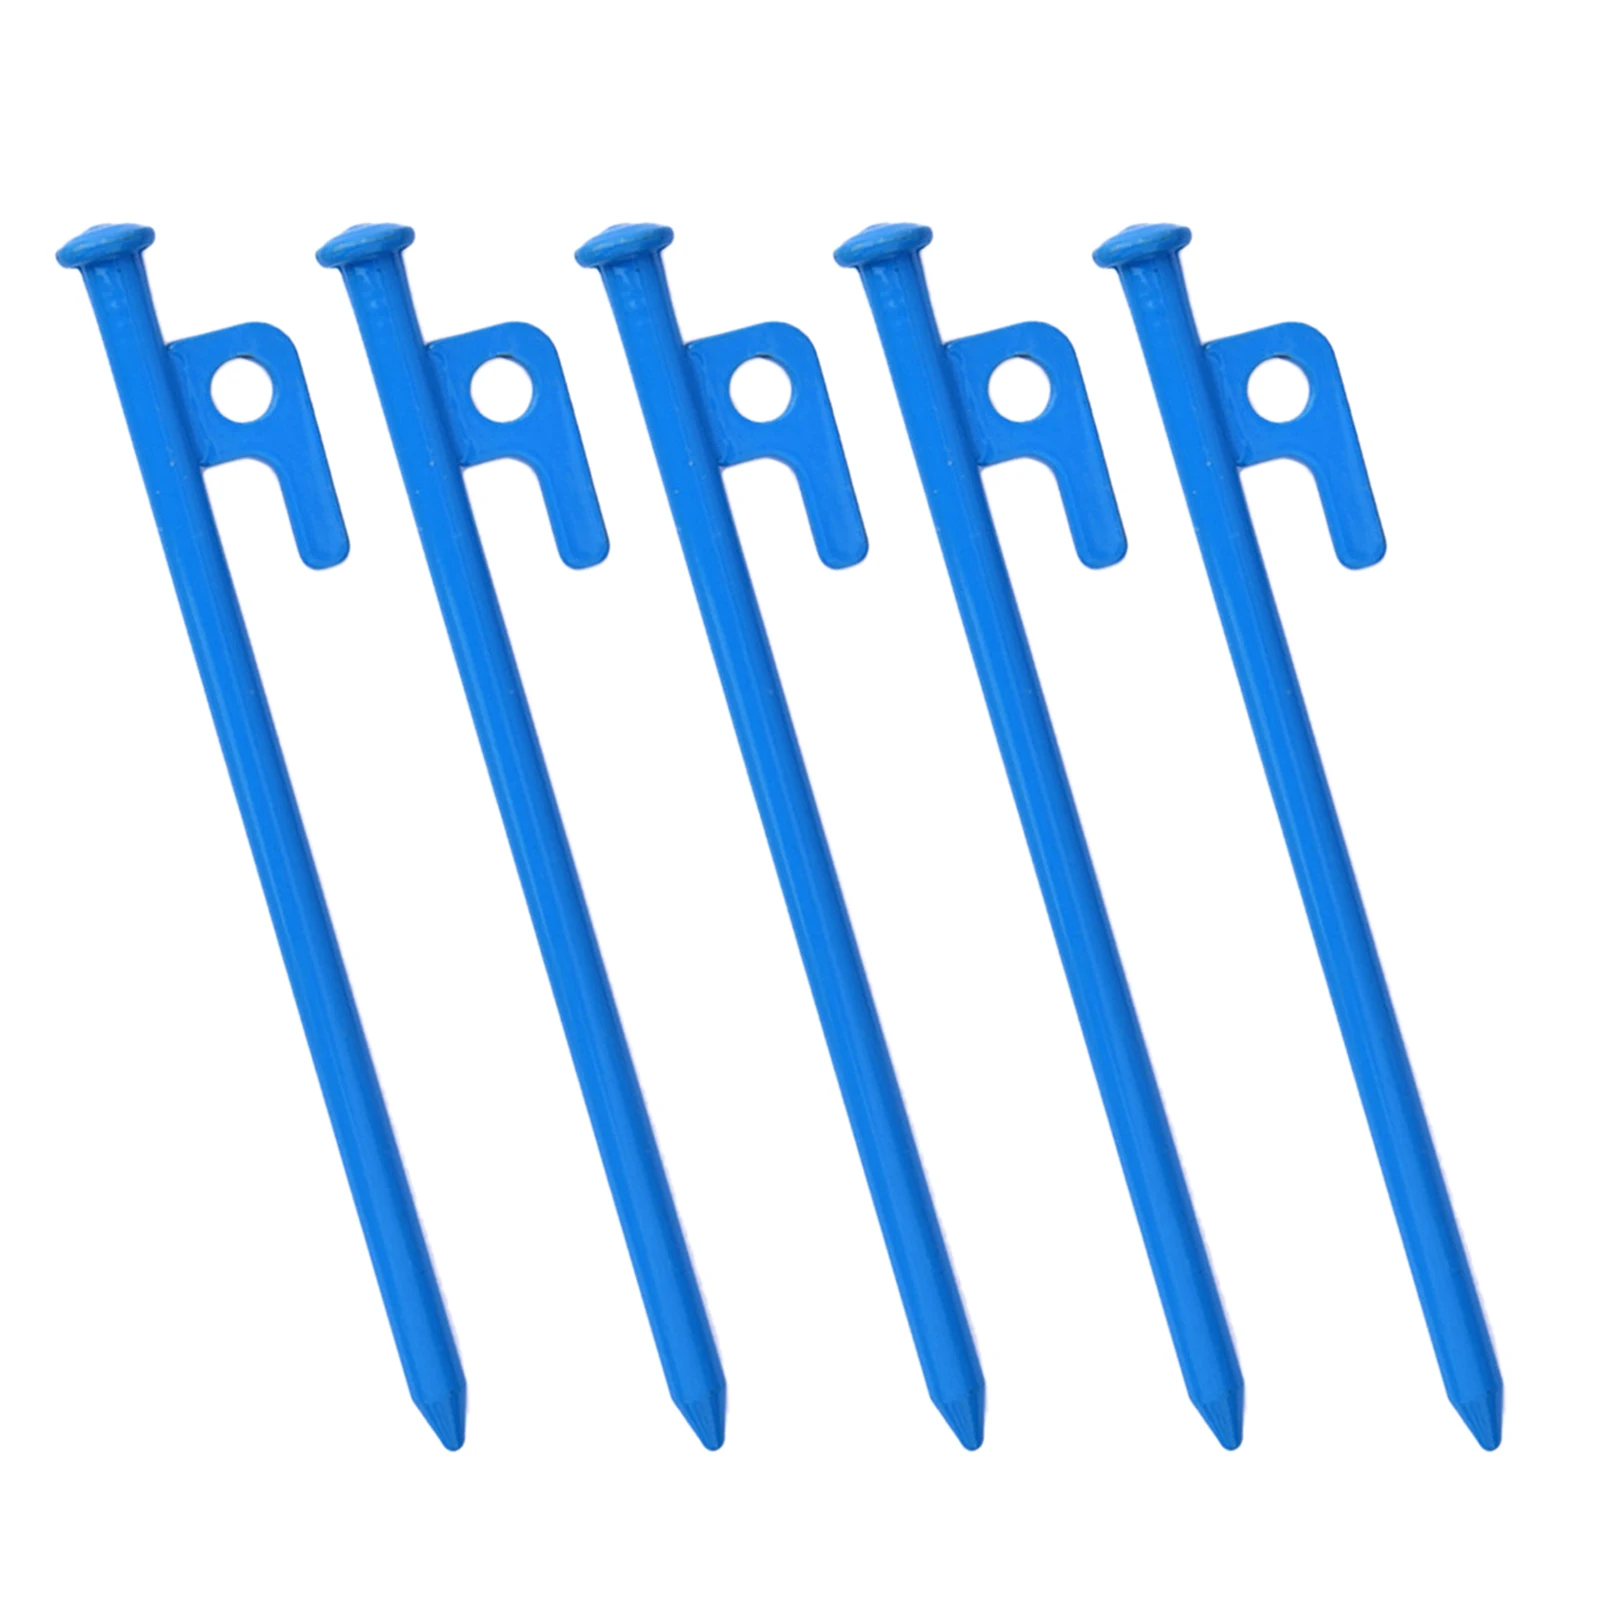 5Pcs Steel Nail Tent Pegs 20cm Ground Nails Outdoor Heavy Duty Steel Awning Canopy Tarp Tent Stakes Tent Accessories